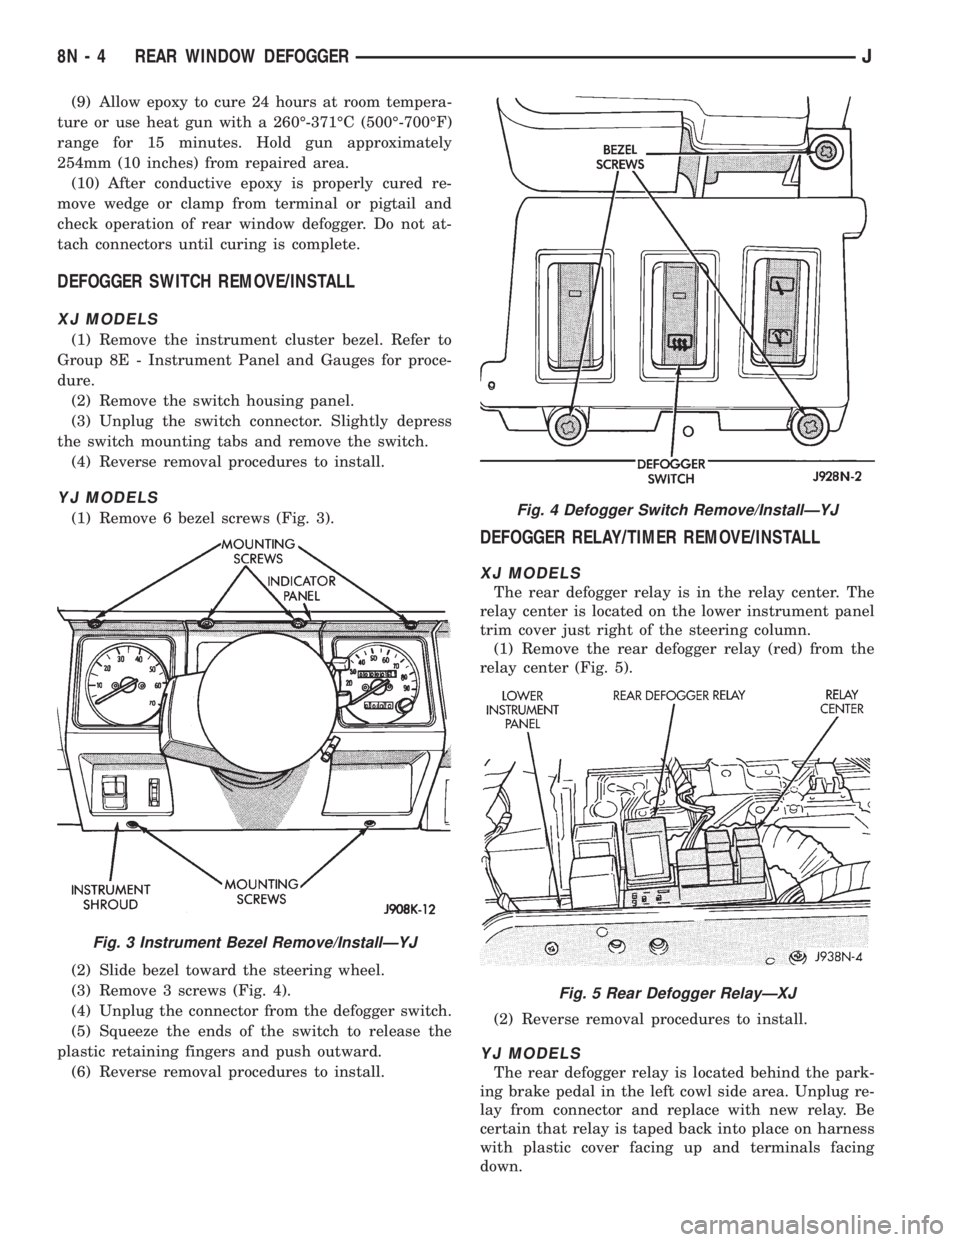 JEEP XJ 1995  Service And Repair Manual (9) Allow epoxy to cure 24 hours at room tempera-
ture or use heat gun with a 260É-371ÉC (500É-700ÉF)
range for 15 minutes. Hold gun approximately
254mm (10 inches) from repaired area.
(10) After 